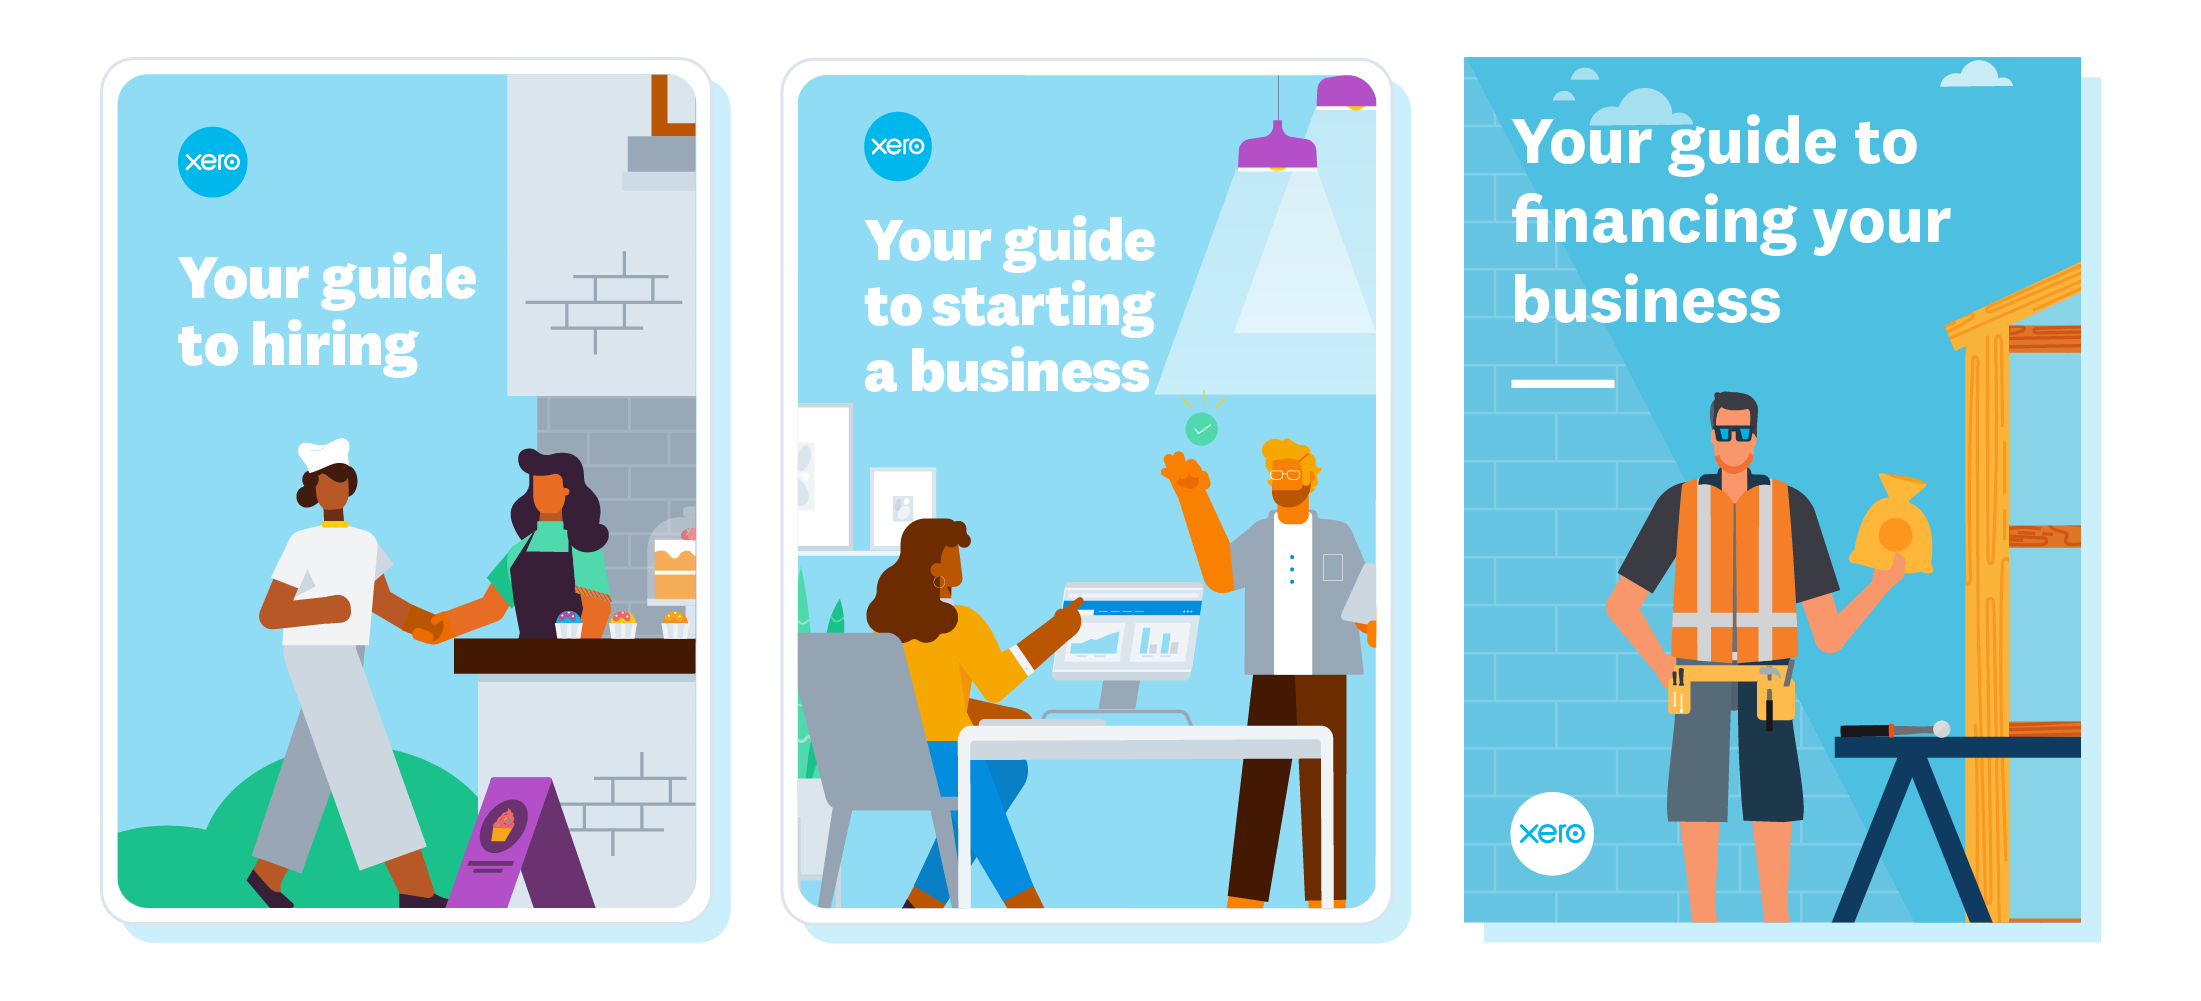 The covers of three small business guides